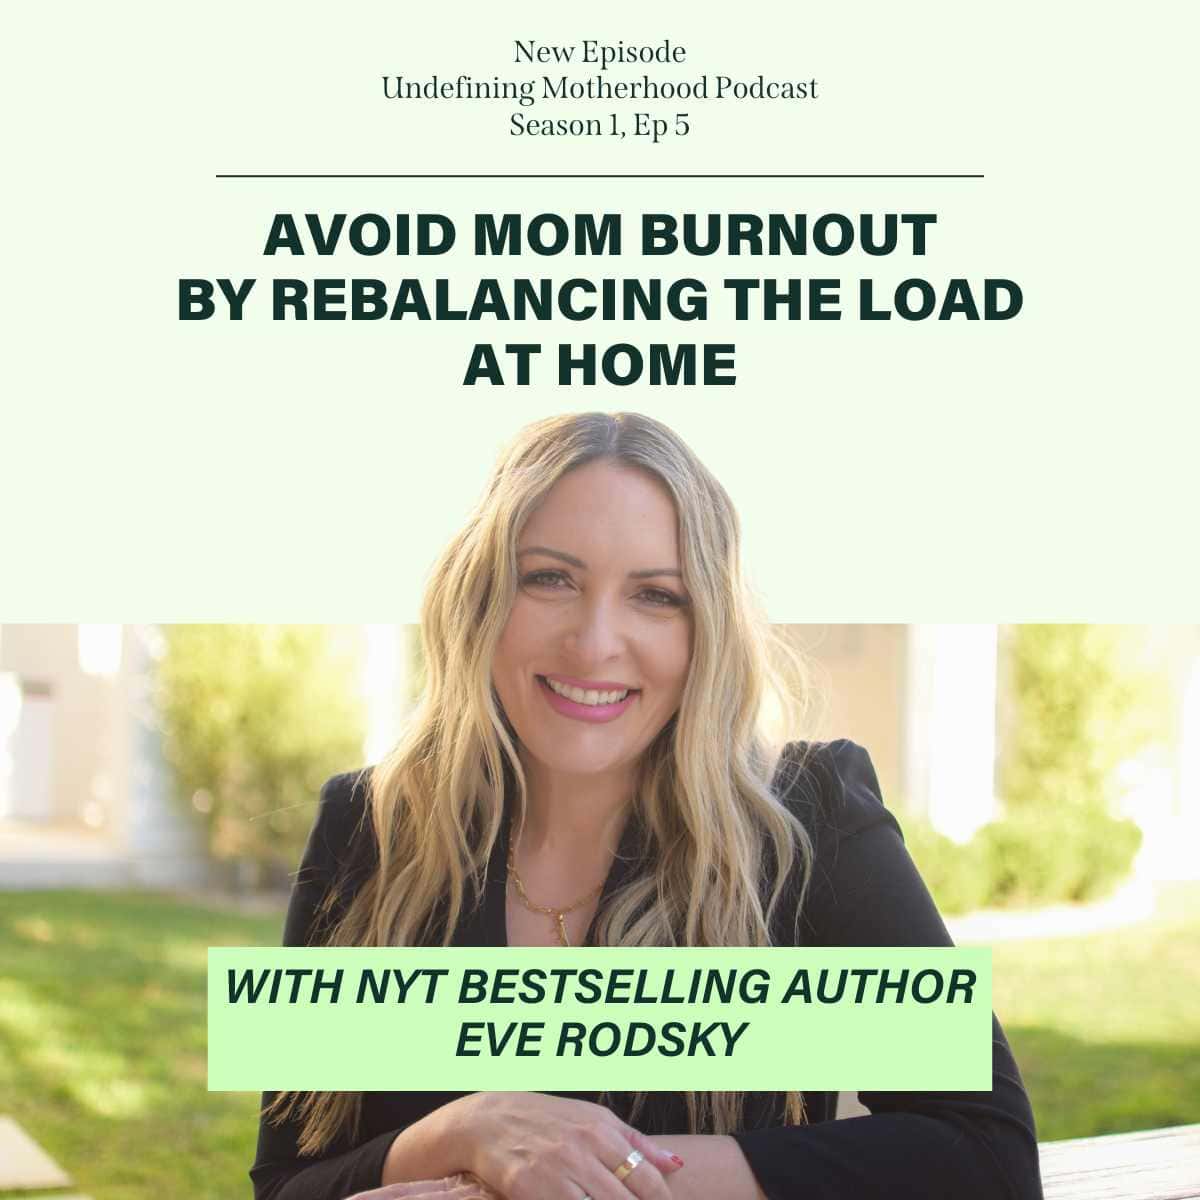 Promotional graphic for the Undefining Motherhood Podcast, Season 1, Episode 5. The upper half of the image features a smiling woman with long blonde hair and a black jacket, seated outdoors. Below her photo, the text reads 'AVOID MOM BURNOUT BY REBALANCING THE LOAD AT HOME' in bold, white letters against a black background. A bright green banner highlights the special guest, 'WITH NYT BESTSELLING AUTHOR EVE RODSKY'.